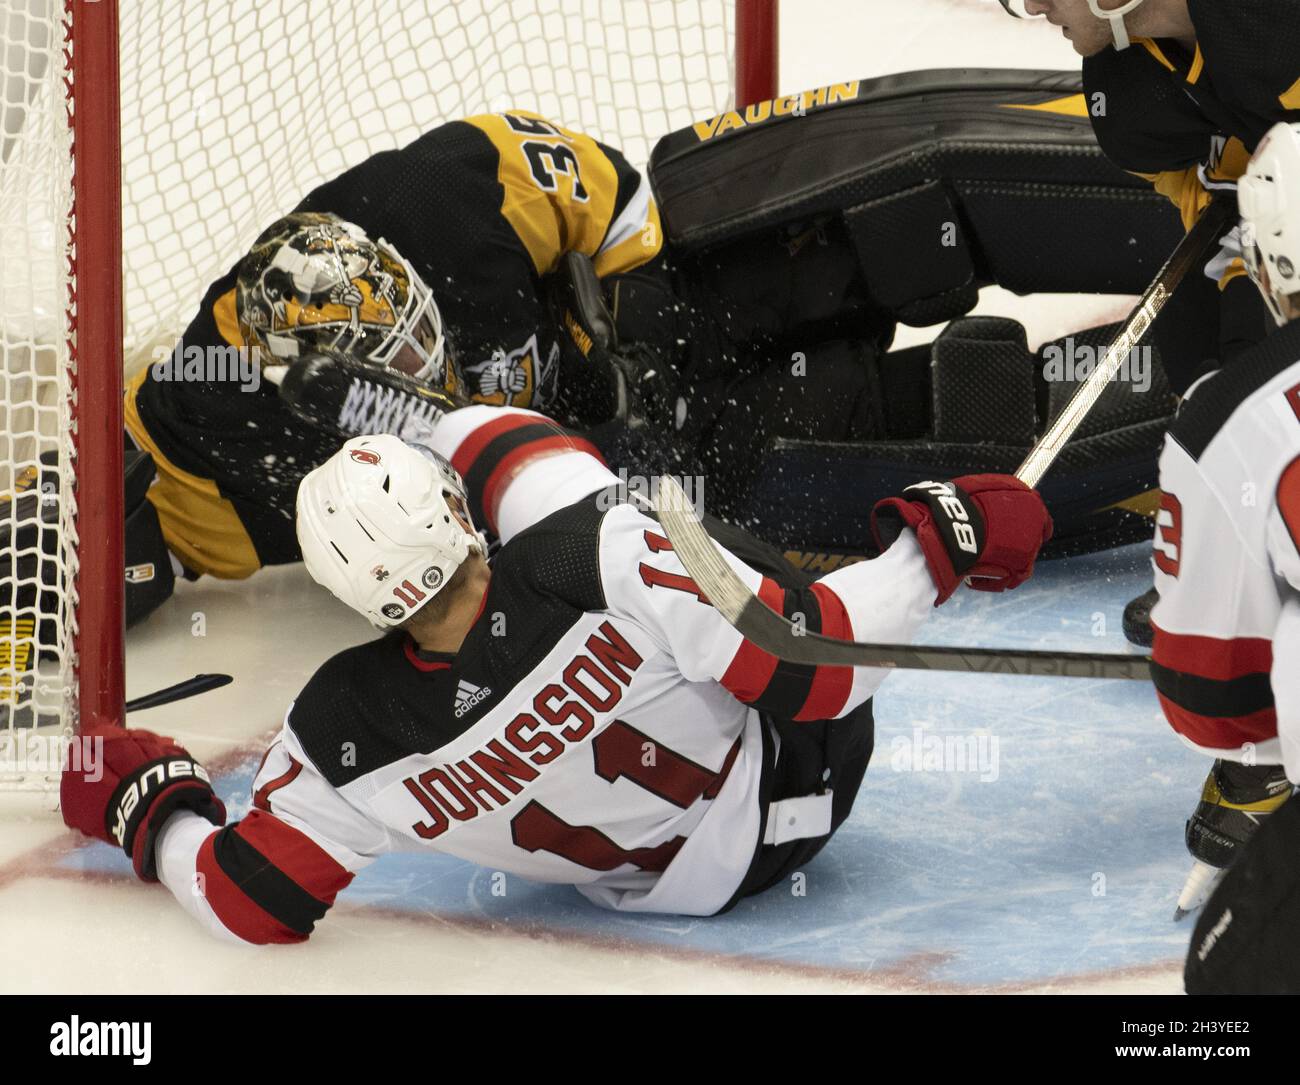 Pittsburgh, United States. 30th Oct, 2021. New Jersey Devils left wing Andreas Johnsson (11) receives a goalie interference penalty as he slides into Pittsburgh Penguins goaltender Tristan Jarry (35) during the 4-2 Devils win in Pittsburgh on Saturday, October 30, 2021. The New Jersey Devils wins the game 4-2. Photo by Archie Carpenter/UPI Credit: UPI/Alamy Live News Stock Photo